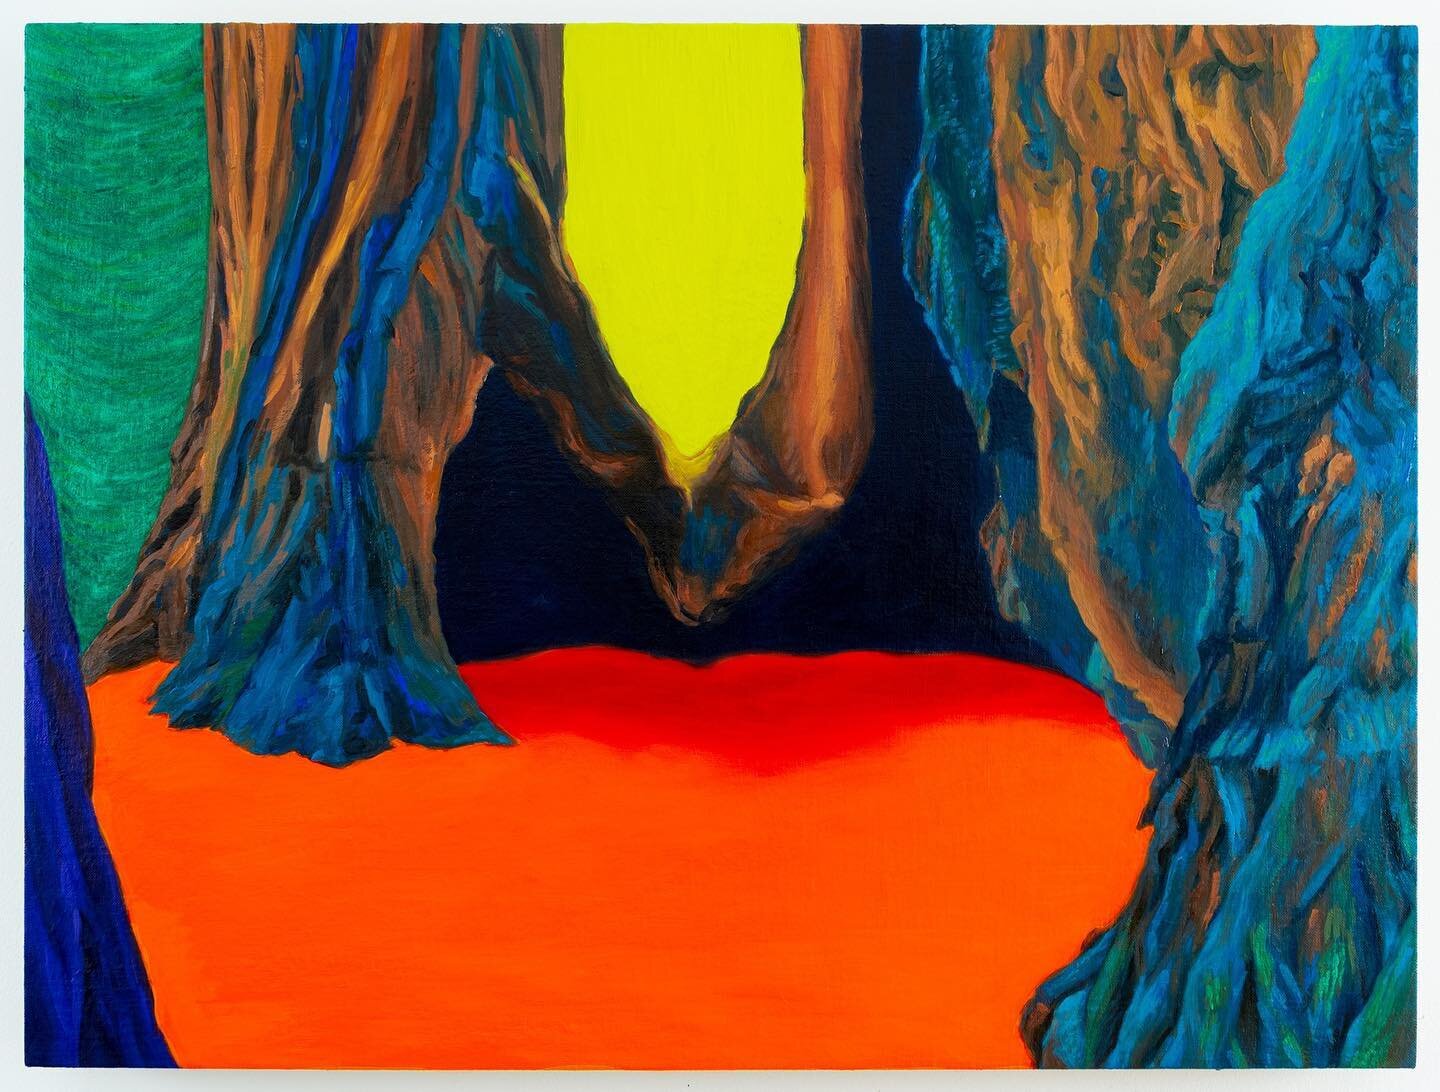 Join us for the gallery reception of &ldquo;Wander Woman 3&rdquo; on March 30, 2023, 6-8pm and see paintings by artist Cherisse Alcantara at the Katz Snyder Gallery @jccsf 

&ldquo;Wander Woman 3&rdquo;
Curated by: Rea Lynn de Guzman @rayuh_lynn 
Exh